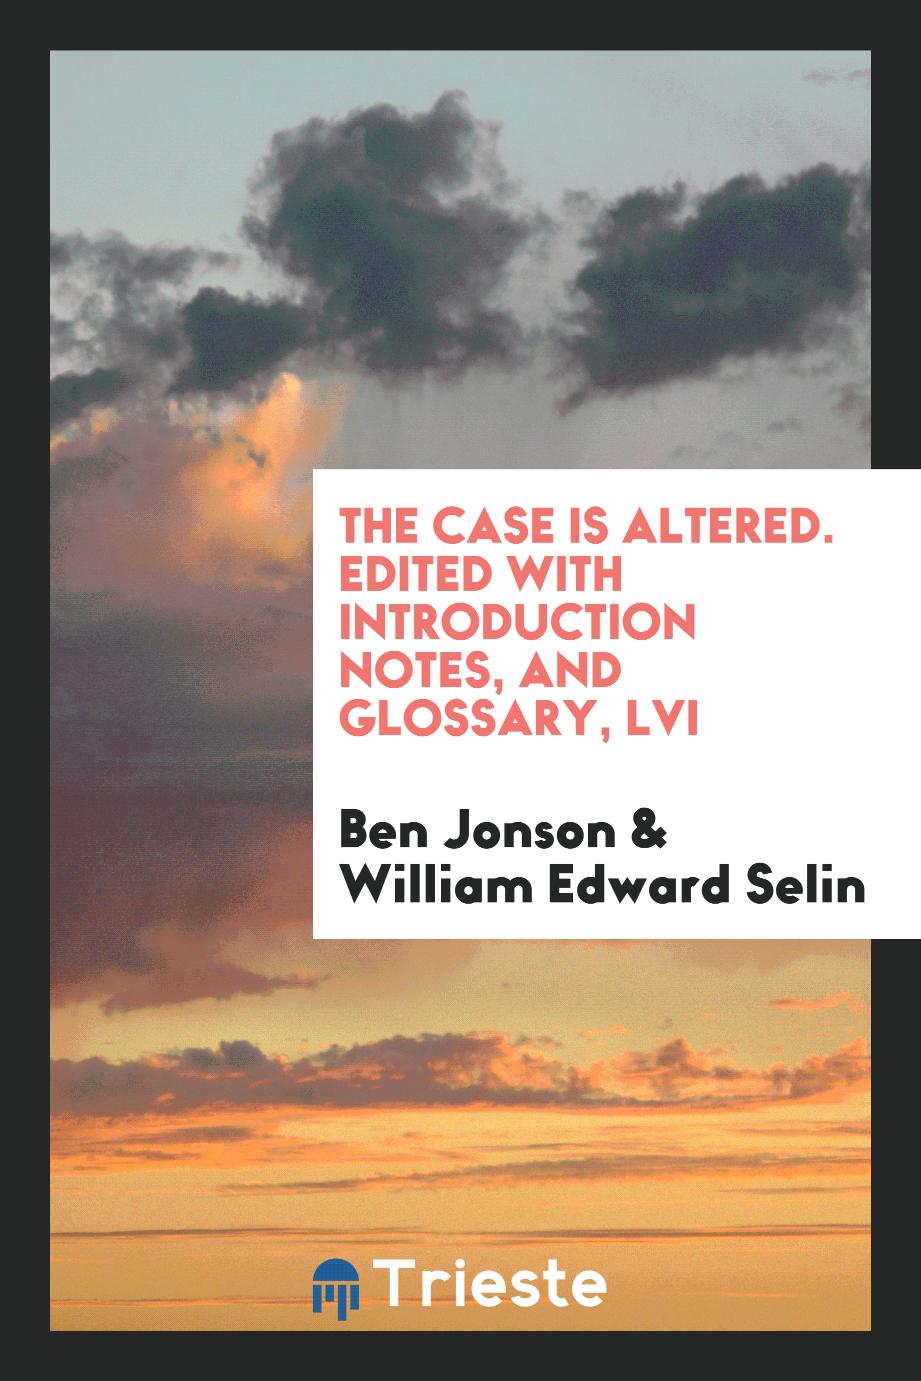 The case is altered. Edited with introduction notes, and glossary, LVI